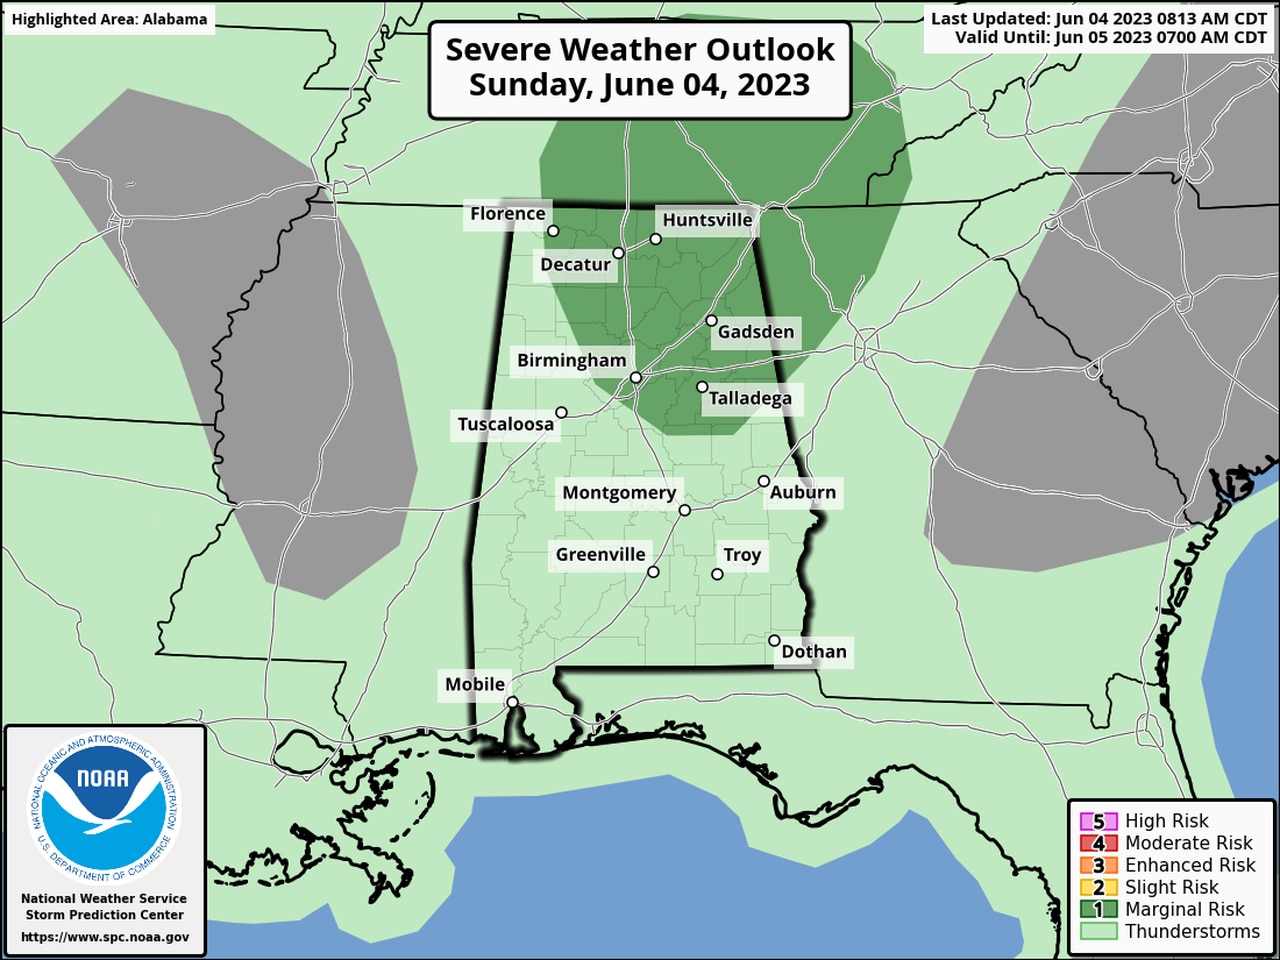 Isolated severe storms possible Sunday in Alabama